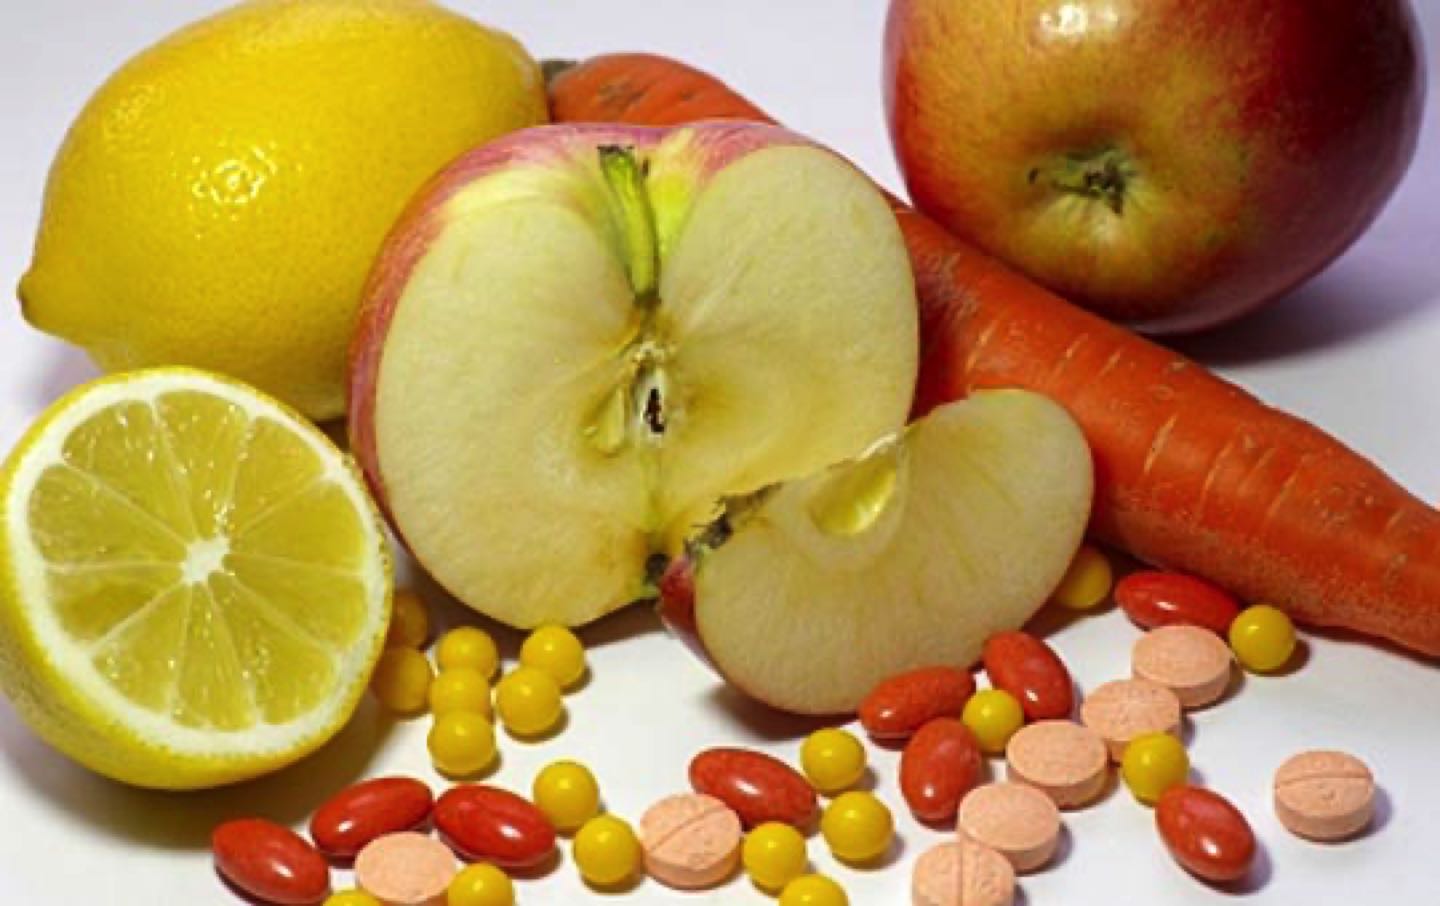 Food and drugs in antiaging medicine